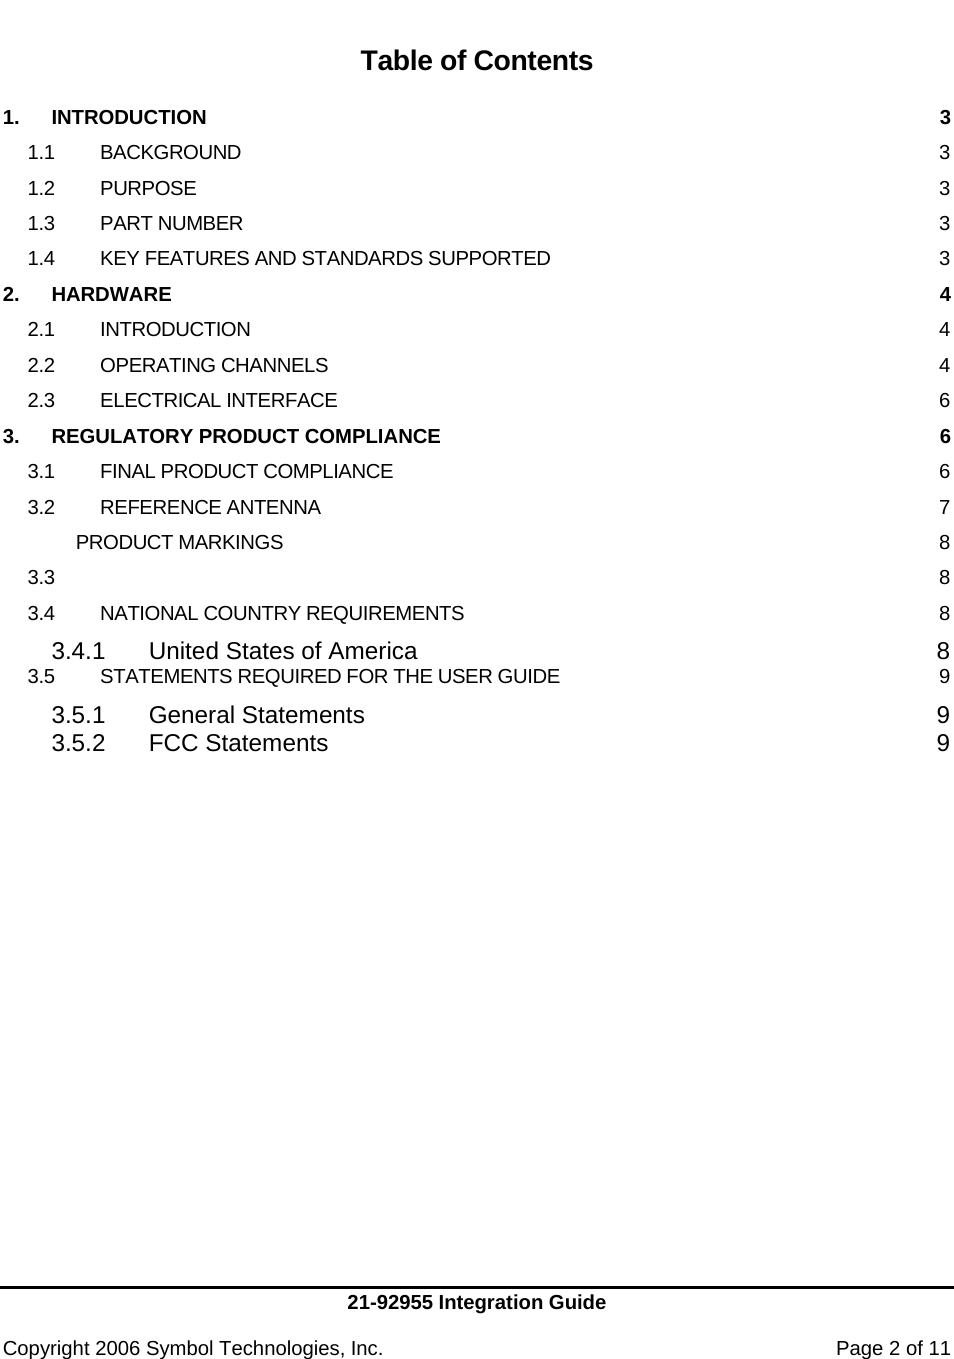     21-92955 Integration Guide  Copyright 2006 Symbol Technologies, Inc.    Page 2 of 11   Table of Contents  1. INTRODUCTION  3 1.1 BACKGROUND  3 1.2 PURPOSE  3 1.3 PART NUMBER  3 1.4 KEY FEATURES AND STANDARDS SUPPORTED  3 2. HARDWARE  4 2.1 INTRODUCTION  4 2.2 OPERATING CHANNELS  4 2.3 ELECTRICAL INTERFACE  6 3. REGULATORY PRODUCT COMPLIANCE  6 3.1 FINAL PRODUCT COMPLIANCE  6 3.2 REFERENCE ANTENNA  7  PRODUCT MARKINGS  8 3.3  8 3.4 NATIONAL COUNTRY REQUIREMENTS  8 3.4.1 United States of America  8 3.5 STATEMENTS REQUIRED FOR THE USER GUIDE  9 3.5.1 General Statements  9 3.5.2 FCC Statements  9 